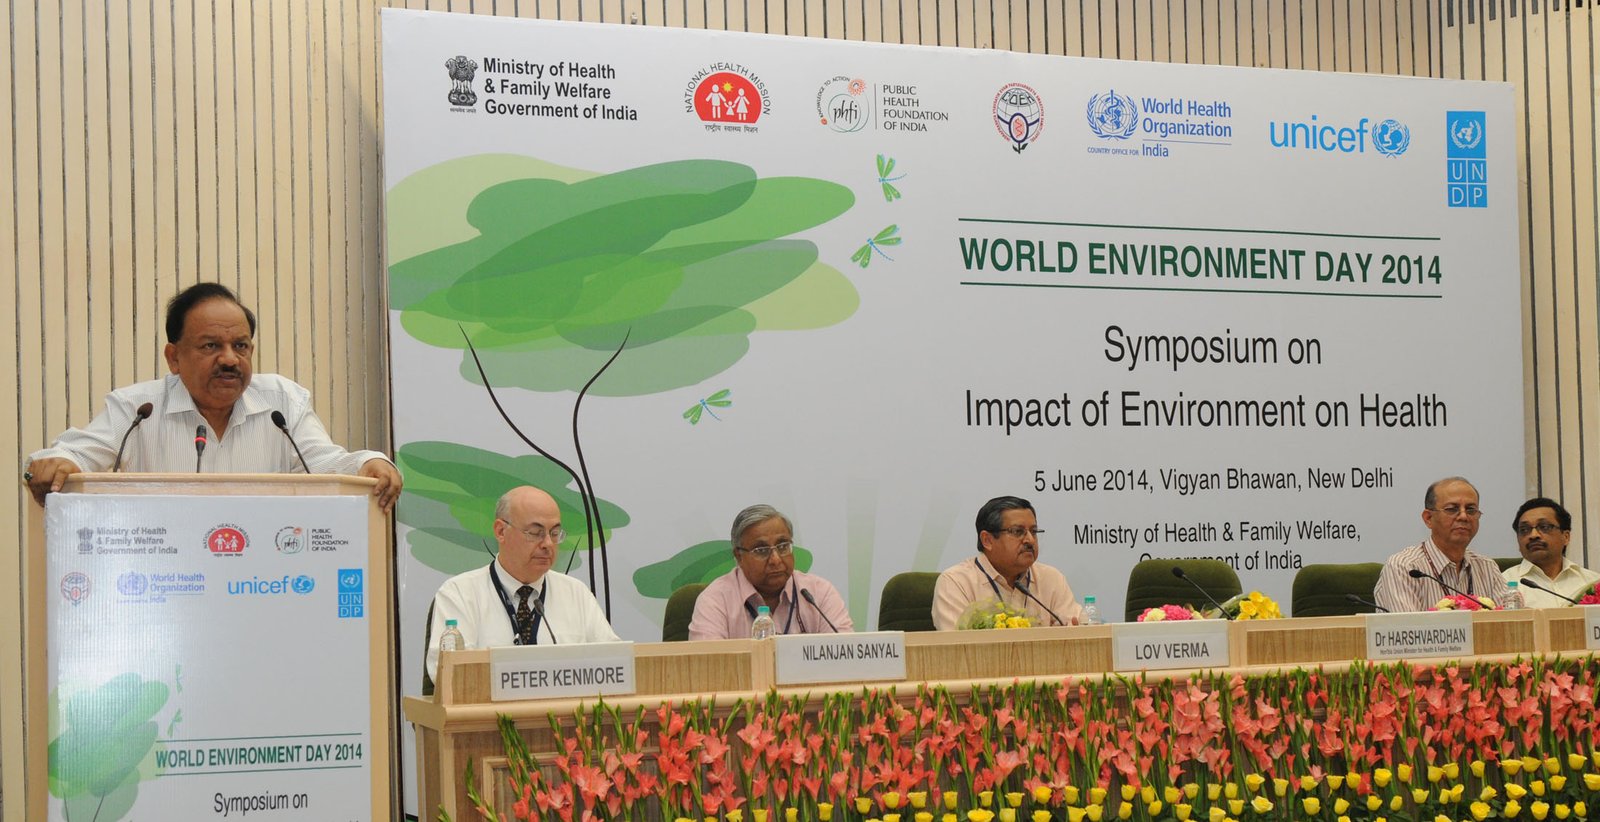 The union ministry for health and family welfare, organised the â€œSymposium on Impact of Environment on Healthâ€? on the occasion of the World Environment Day, in New Delhi on June 5, 2014